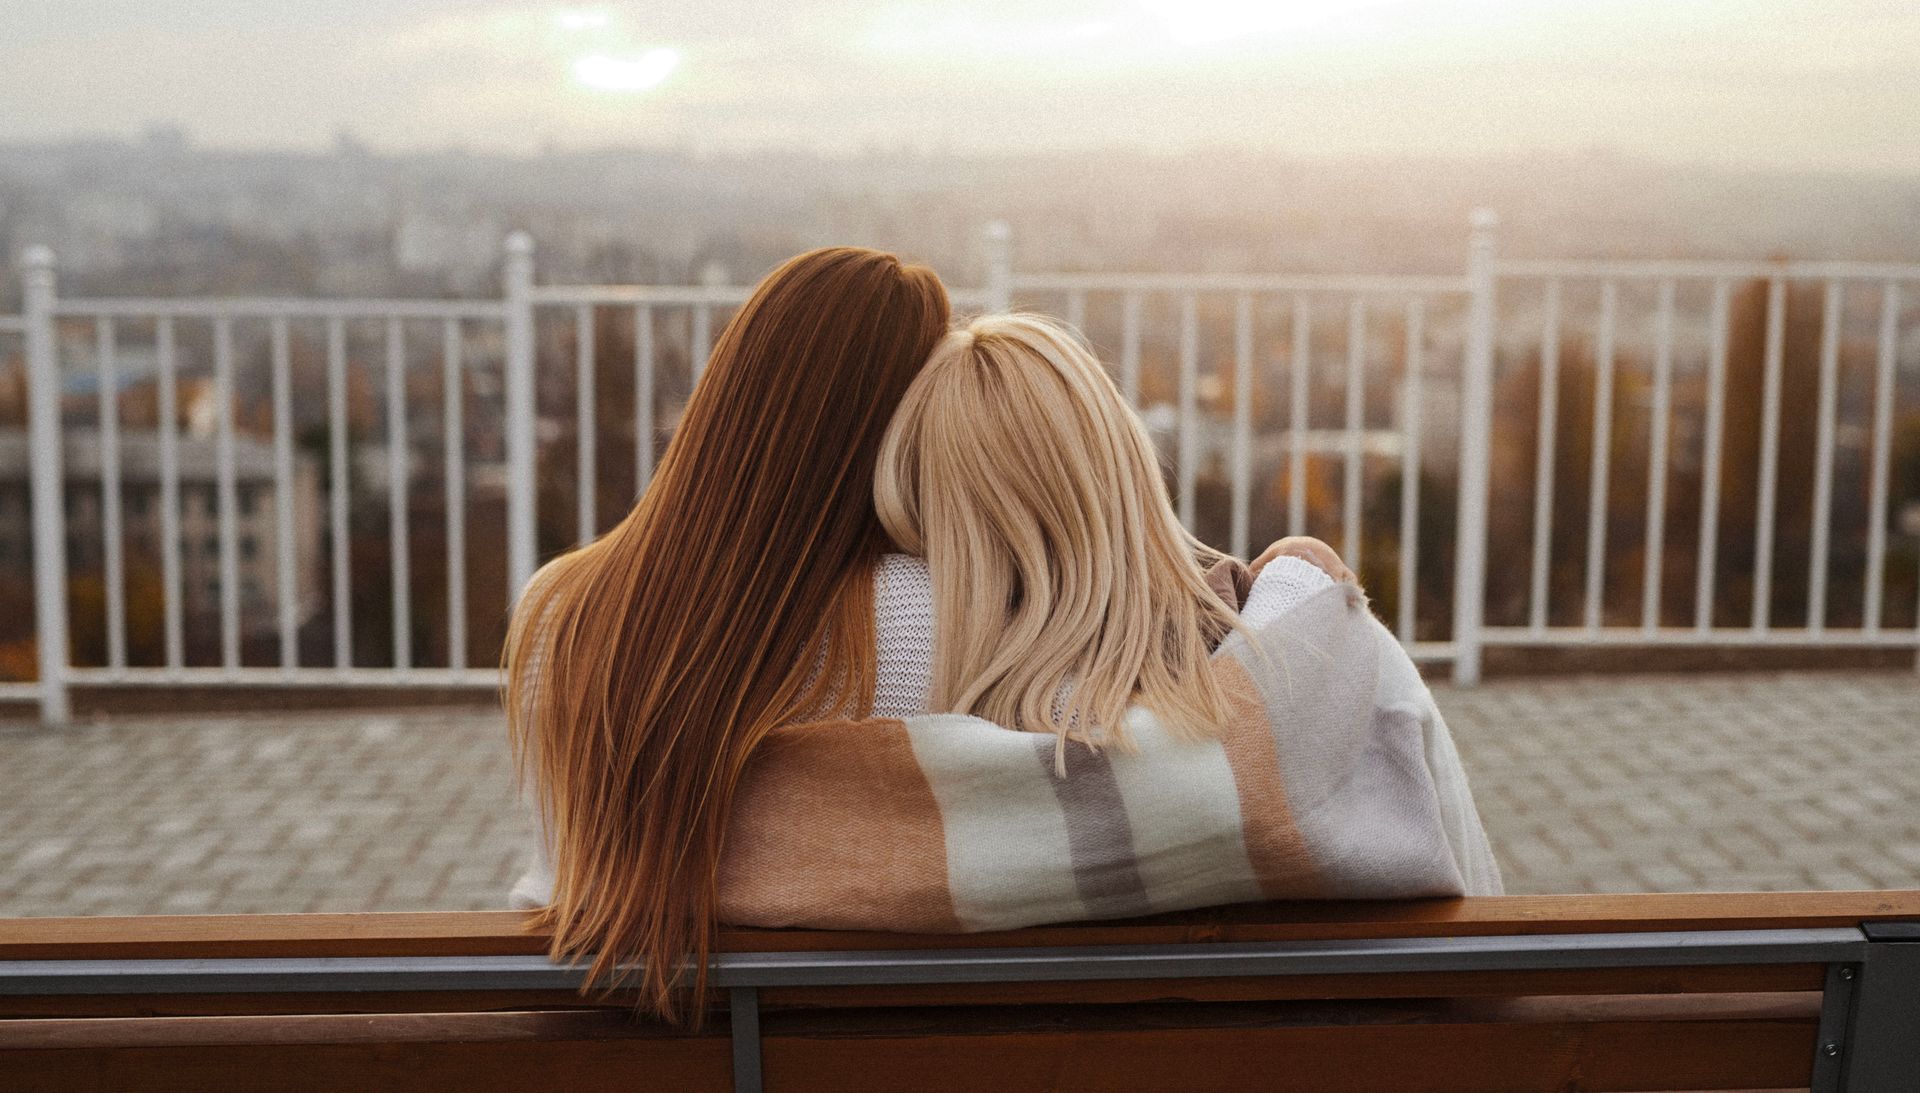 Two women are sitting on a bench hugging each other.